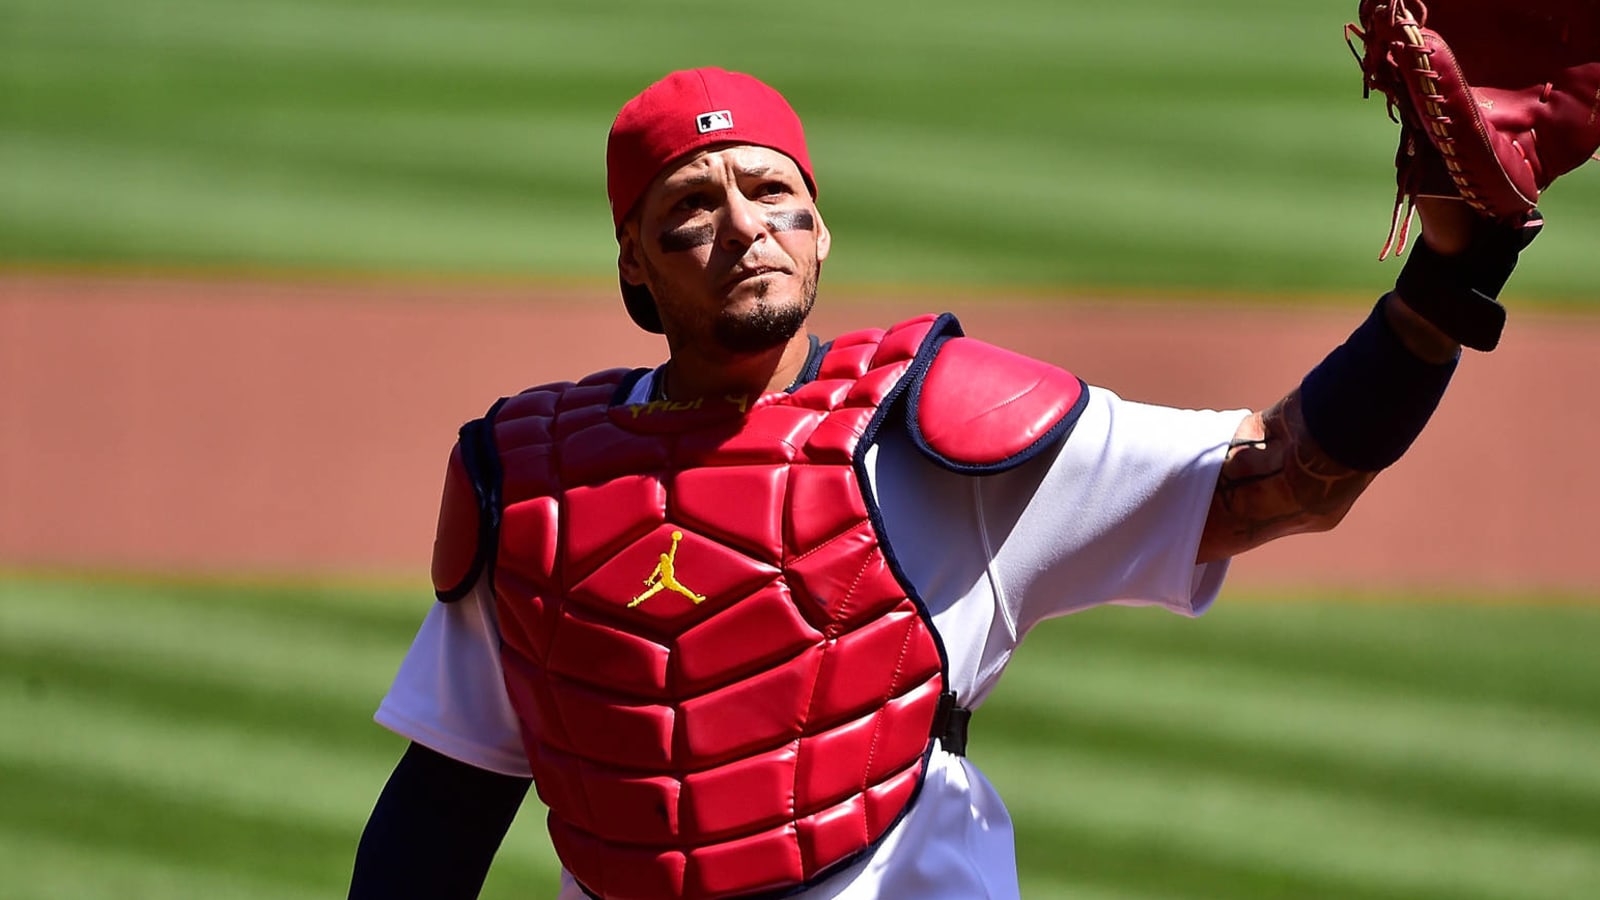 Yadier Molina appears to want Albert Pujols to return to Cardinals